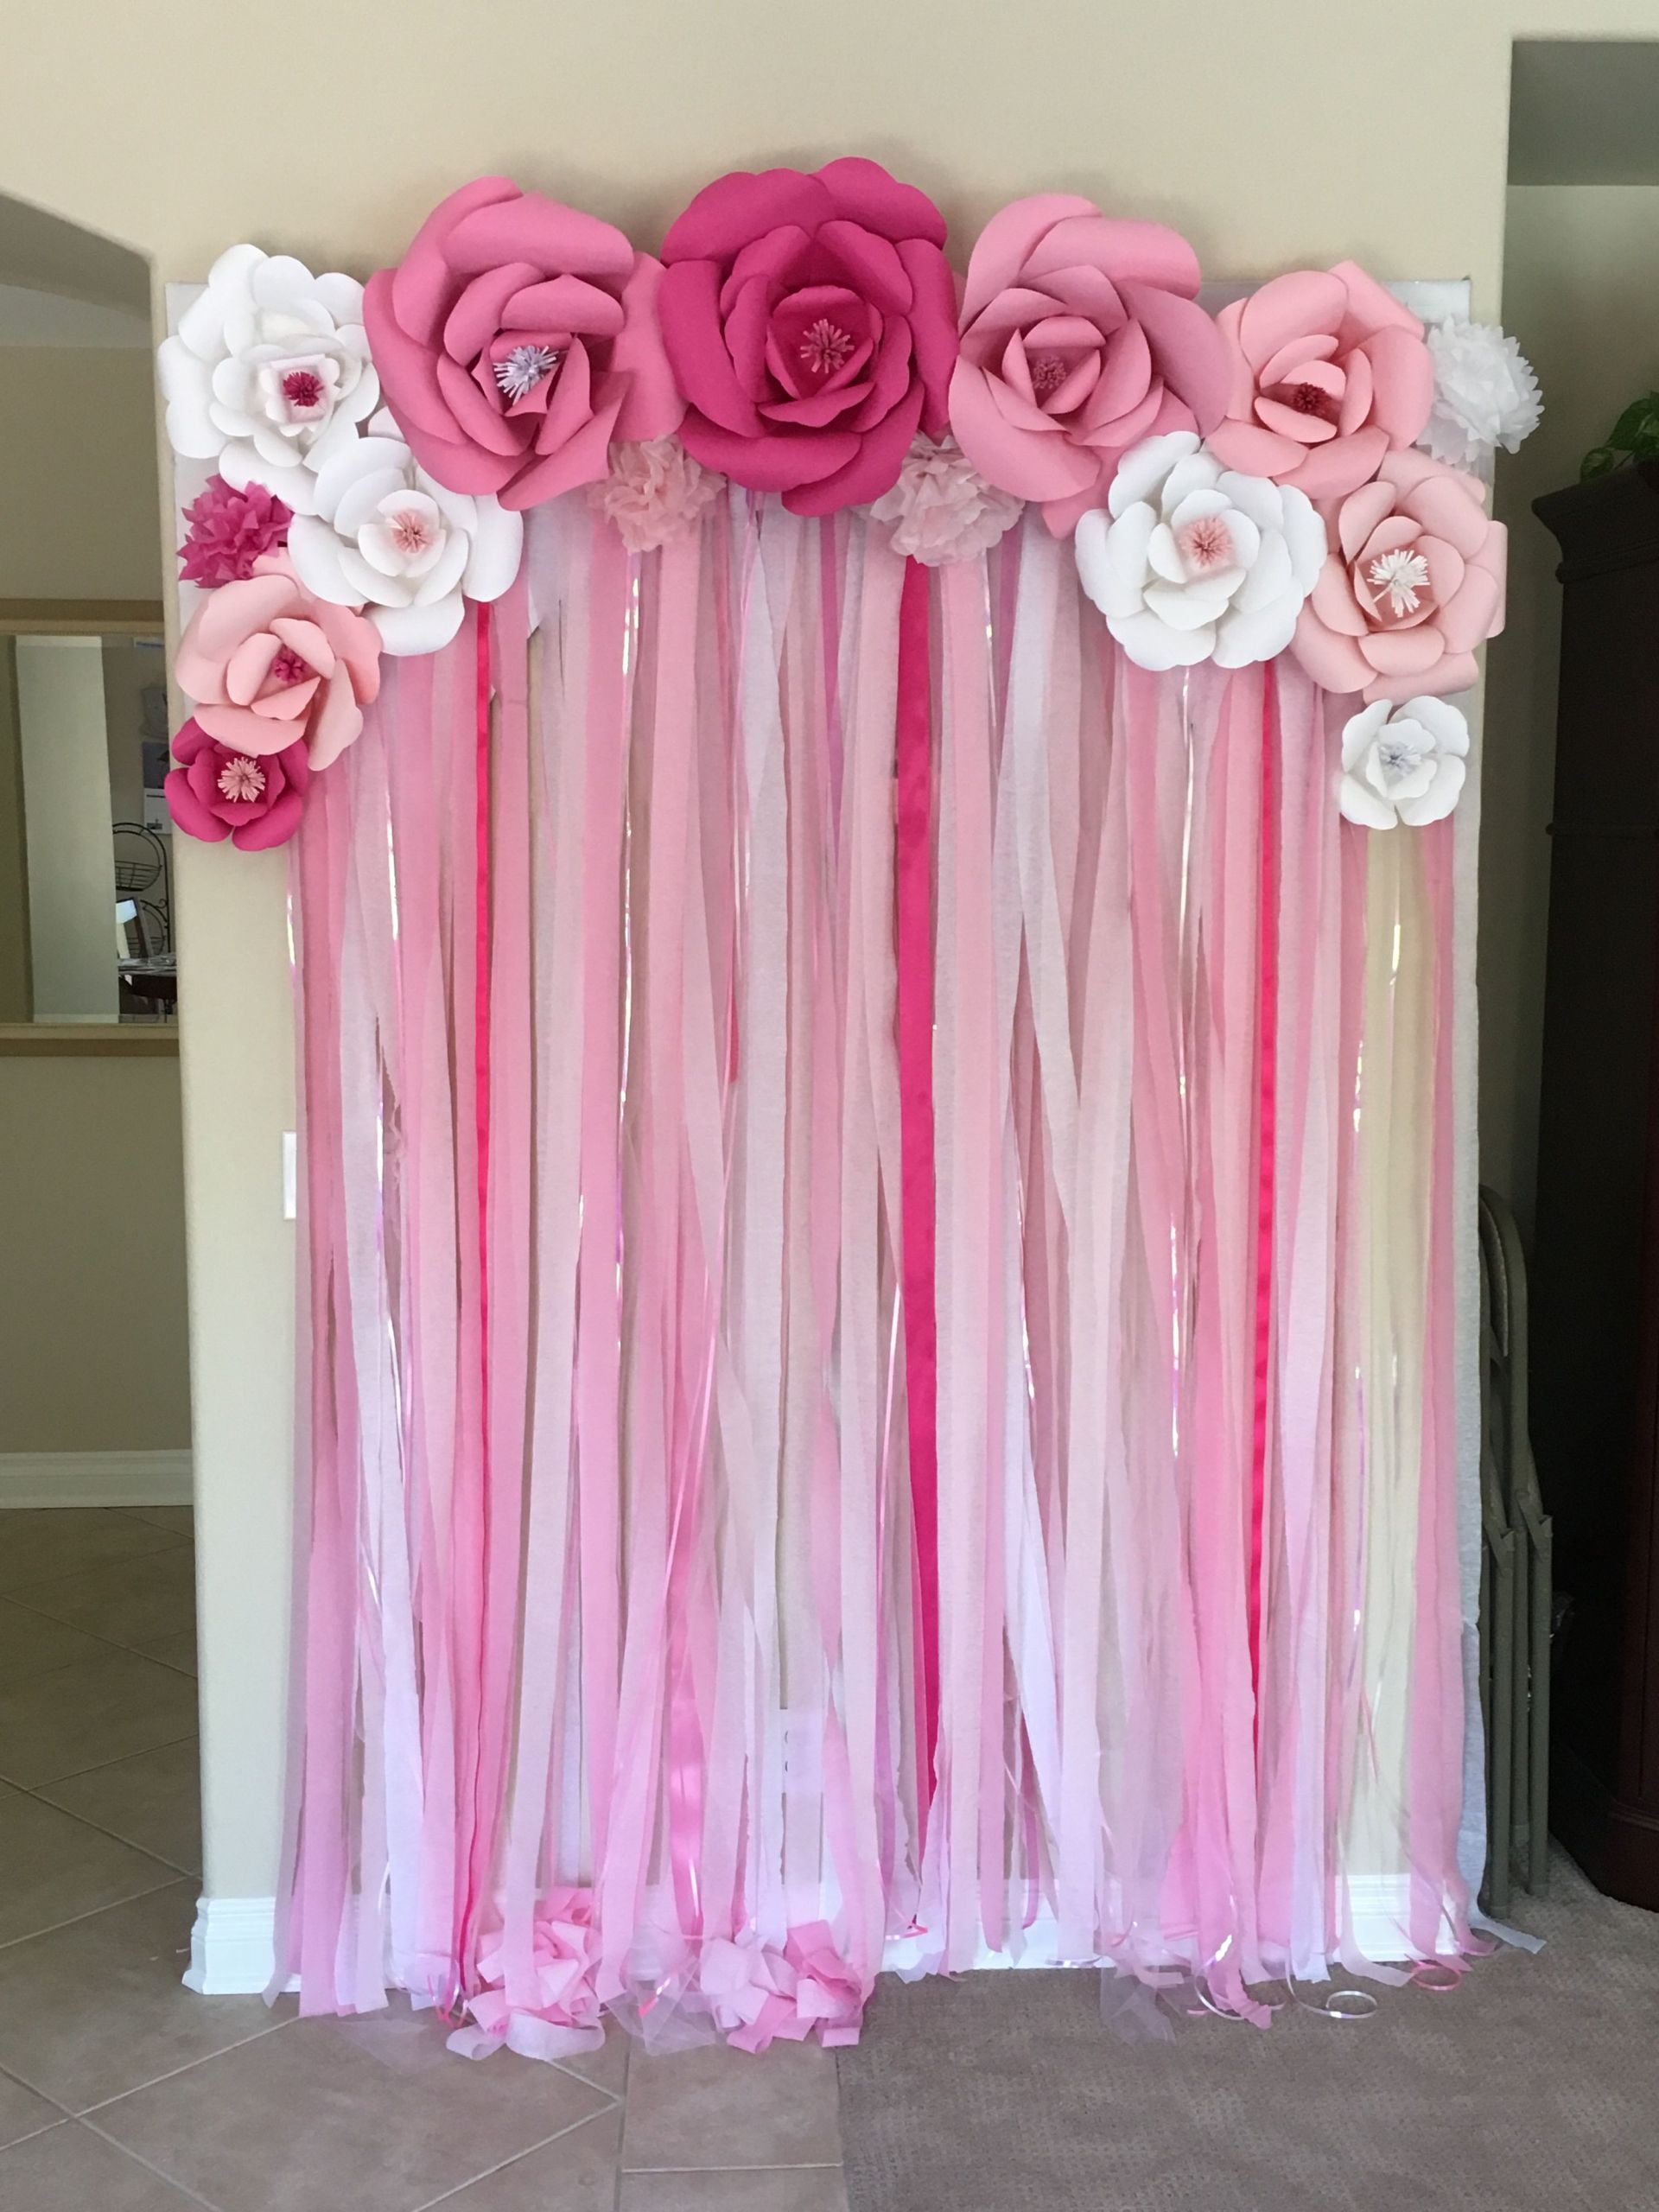 DIY Baby Shower Decorations For A Girl
 backdrop for a girl baby shower